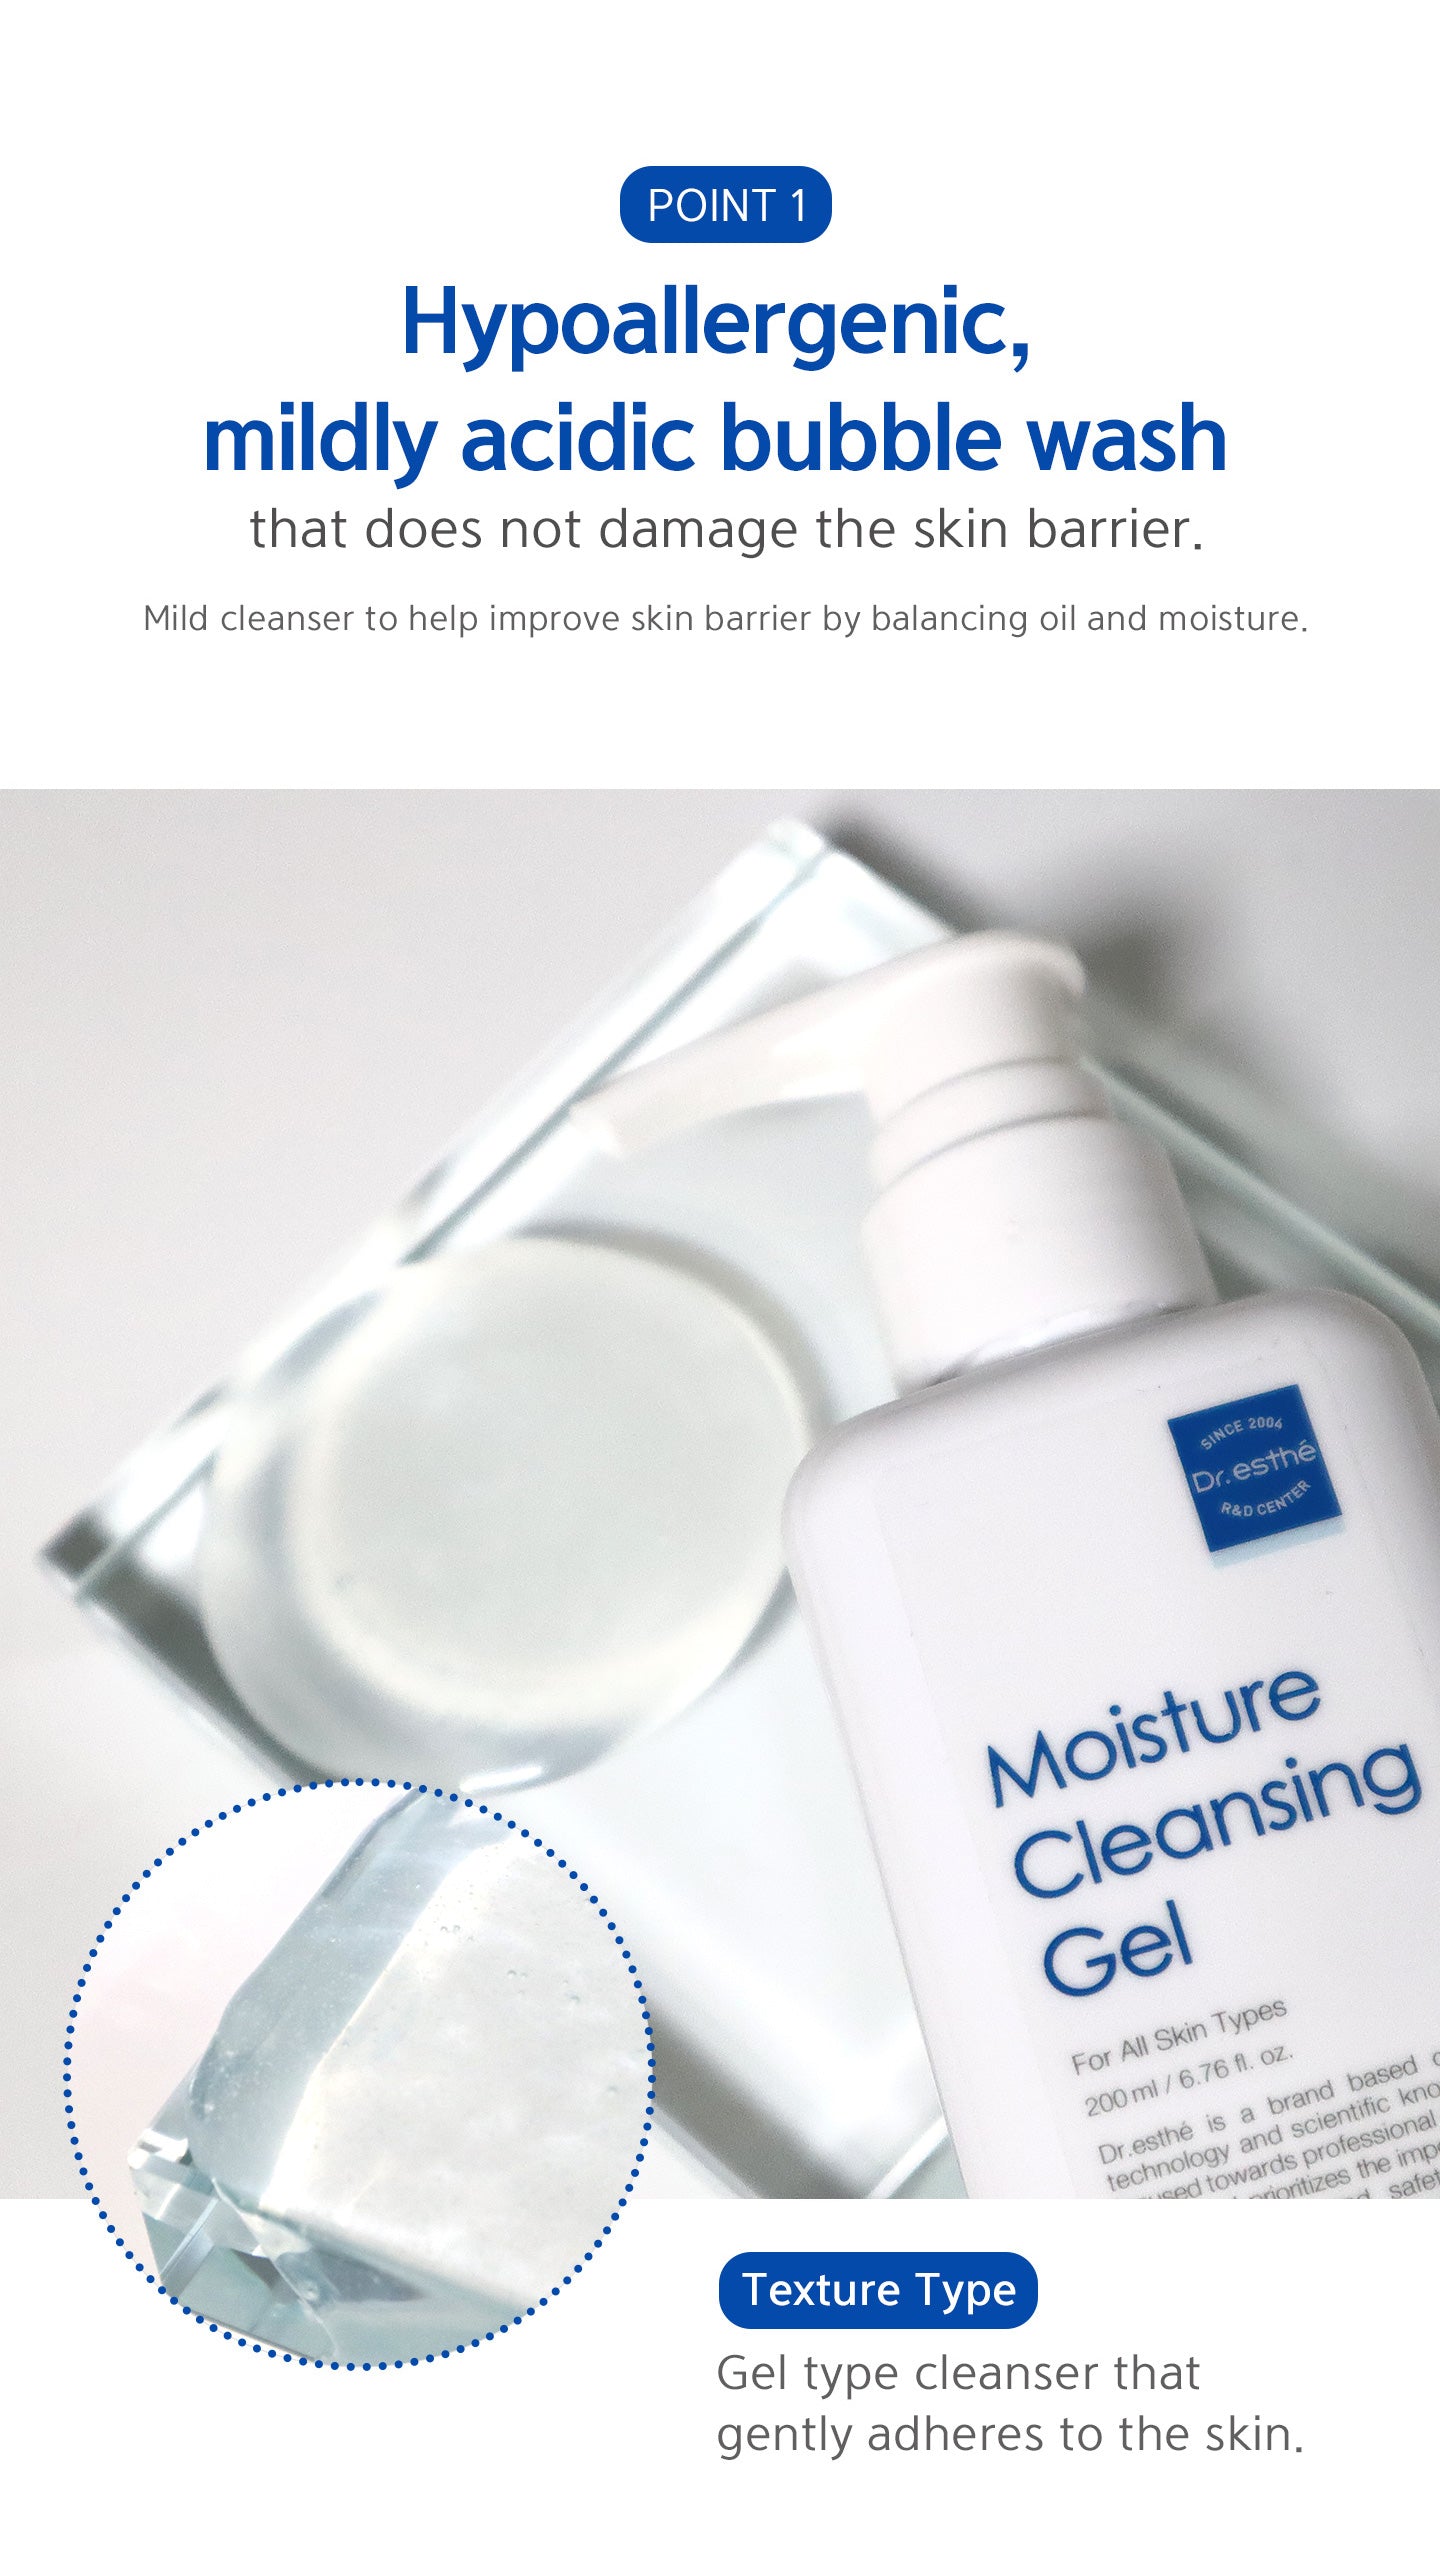 Hypoallergenic, mild acidic bubble wash that does not damage the skin barrier. Mild cleanser to help improve skin barrier by balancing oil and moisture. 